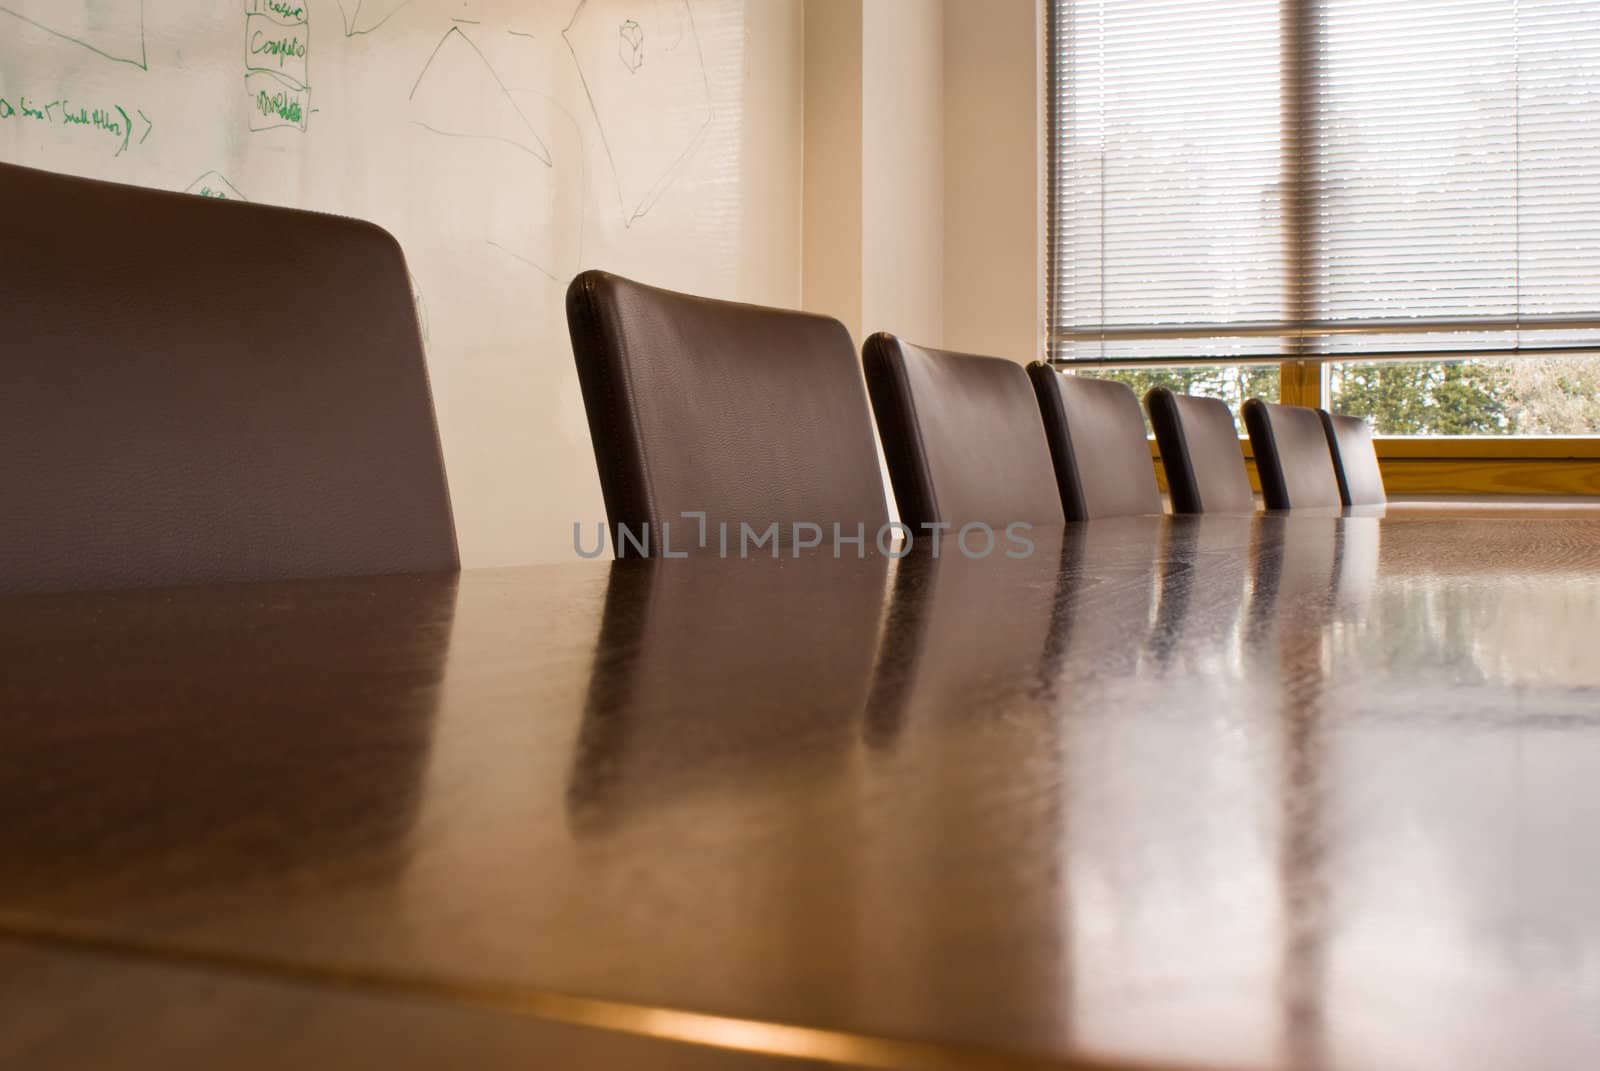 Conference Room Table by fcarucci